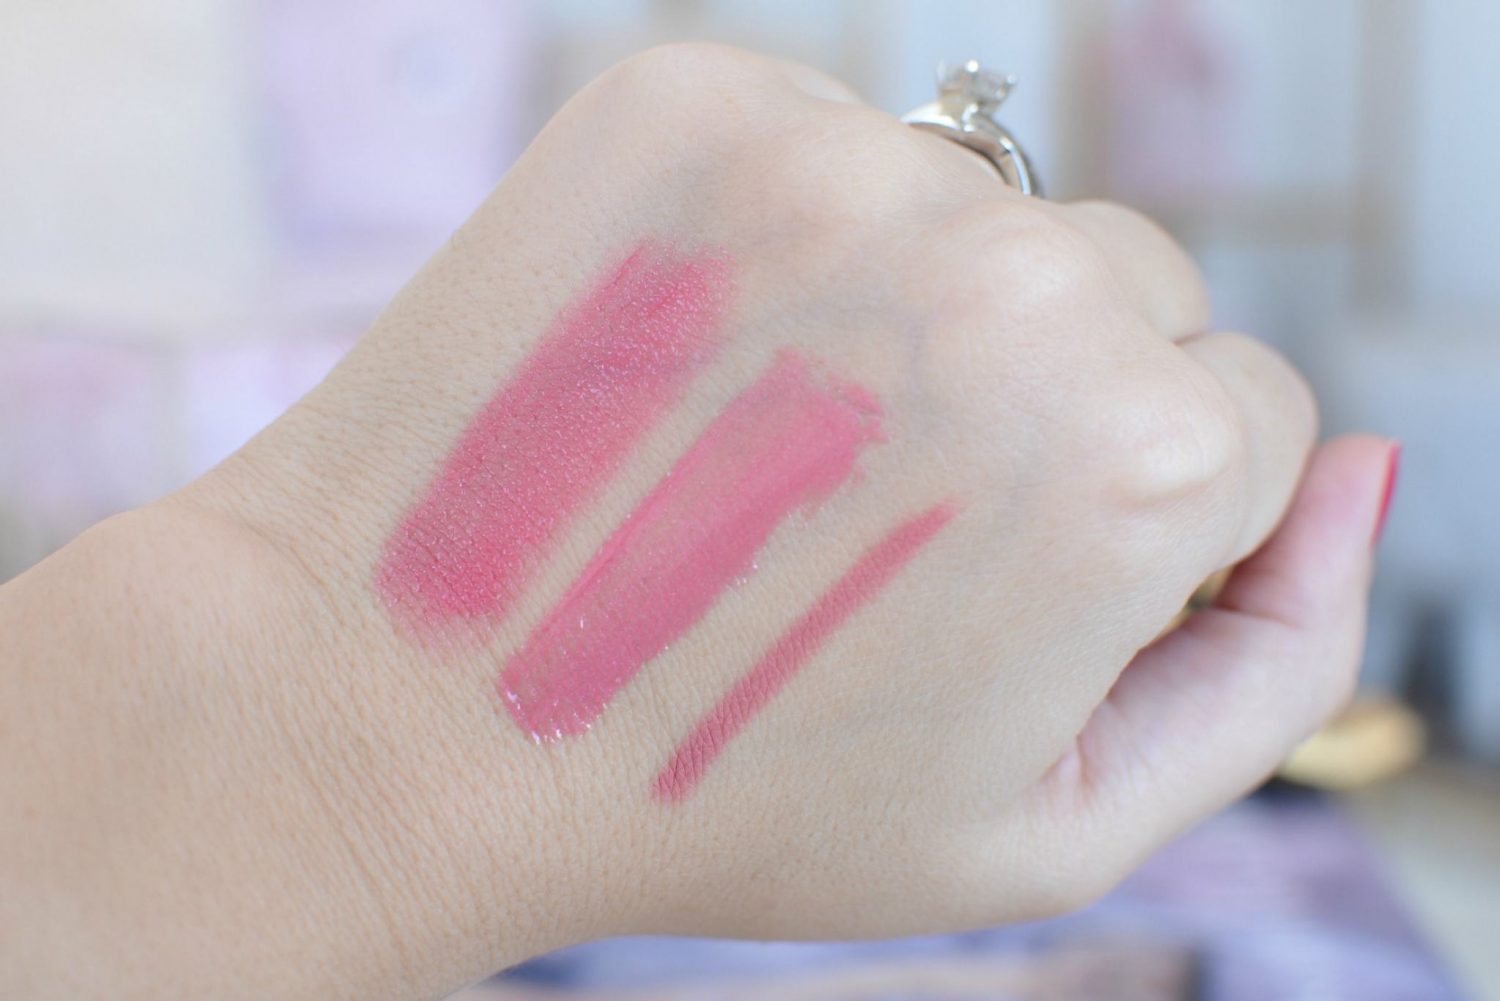 It Cosmetics Your Lips But Better All-Day Waterproof Lip Liner Stain